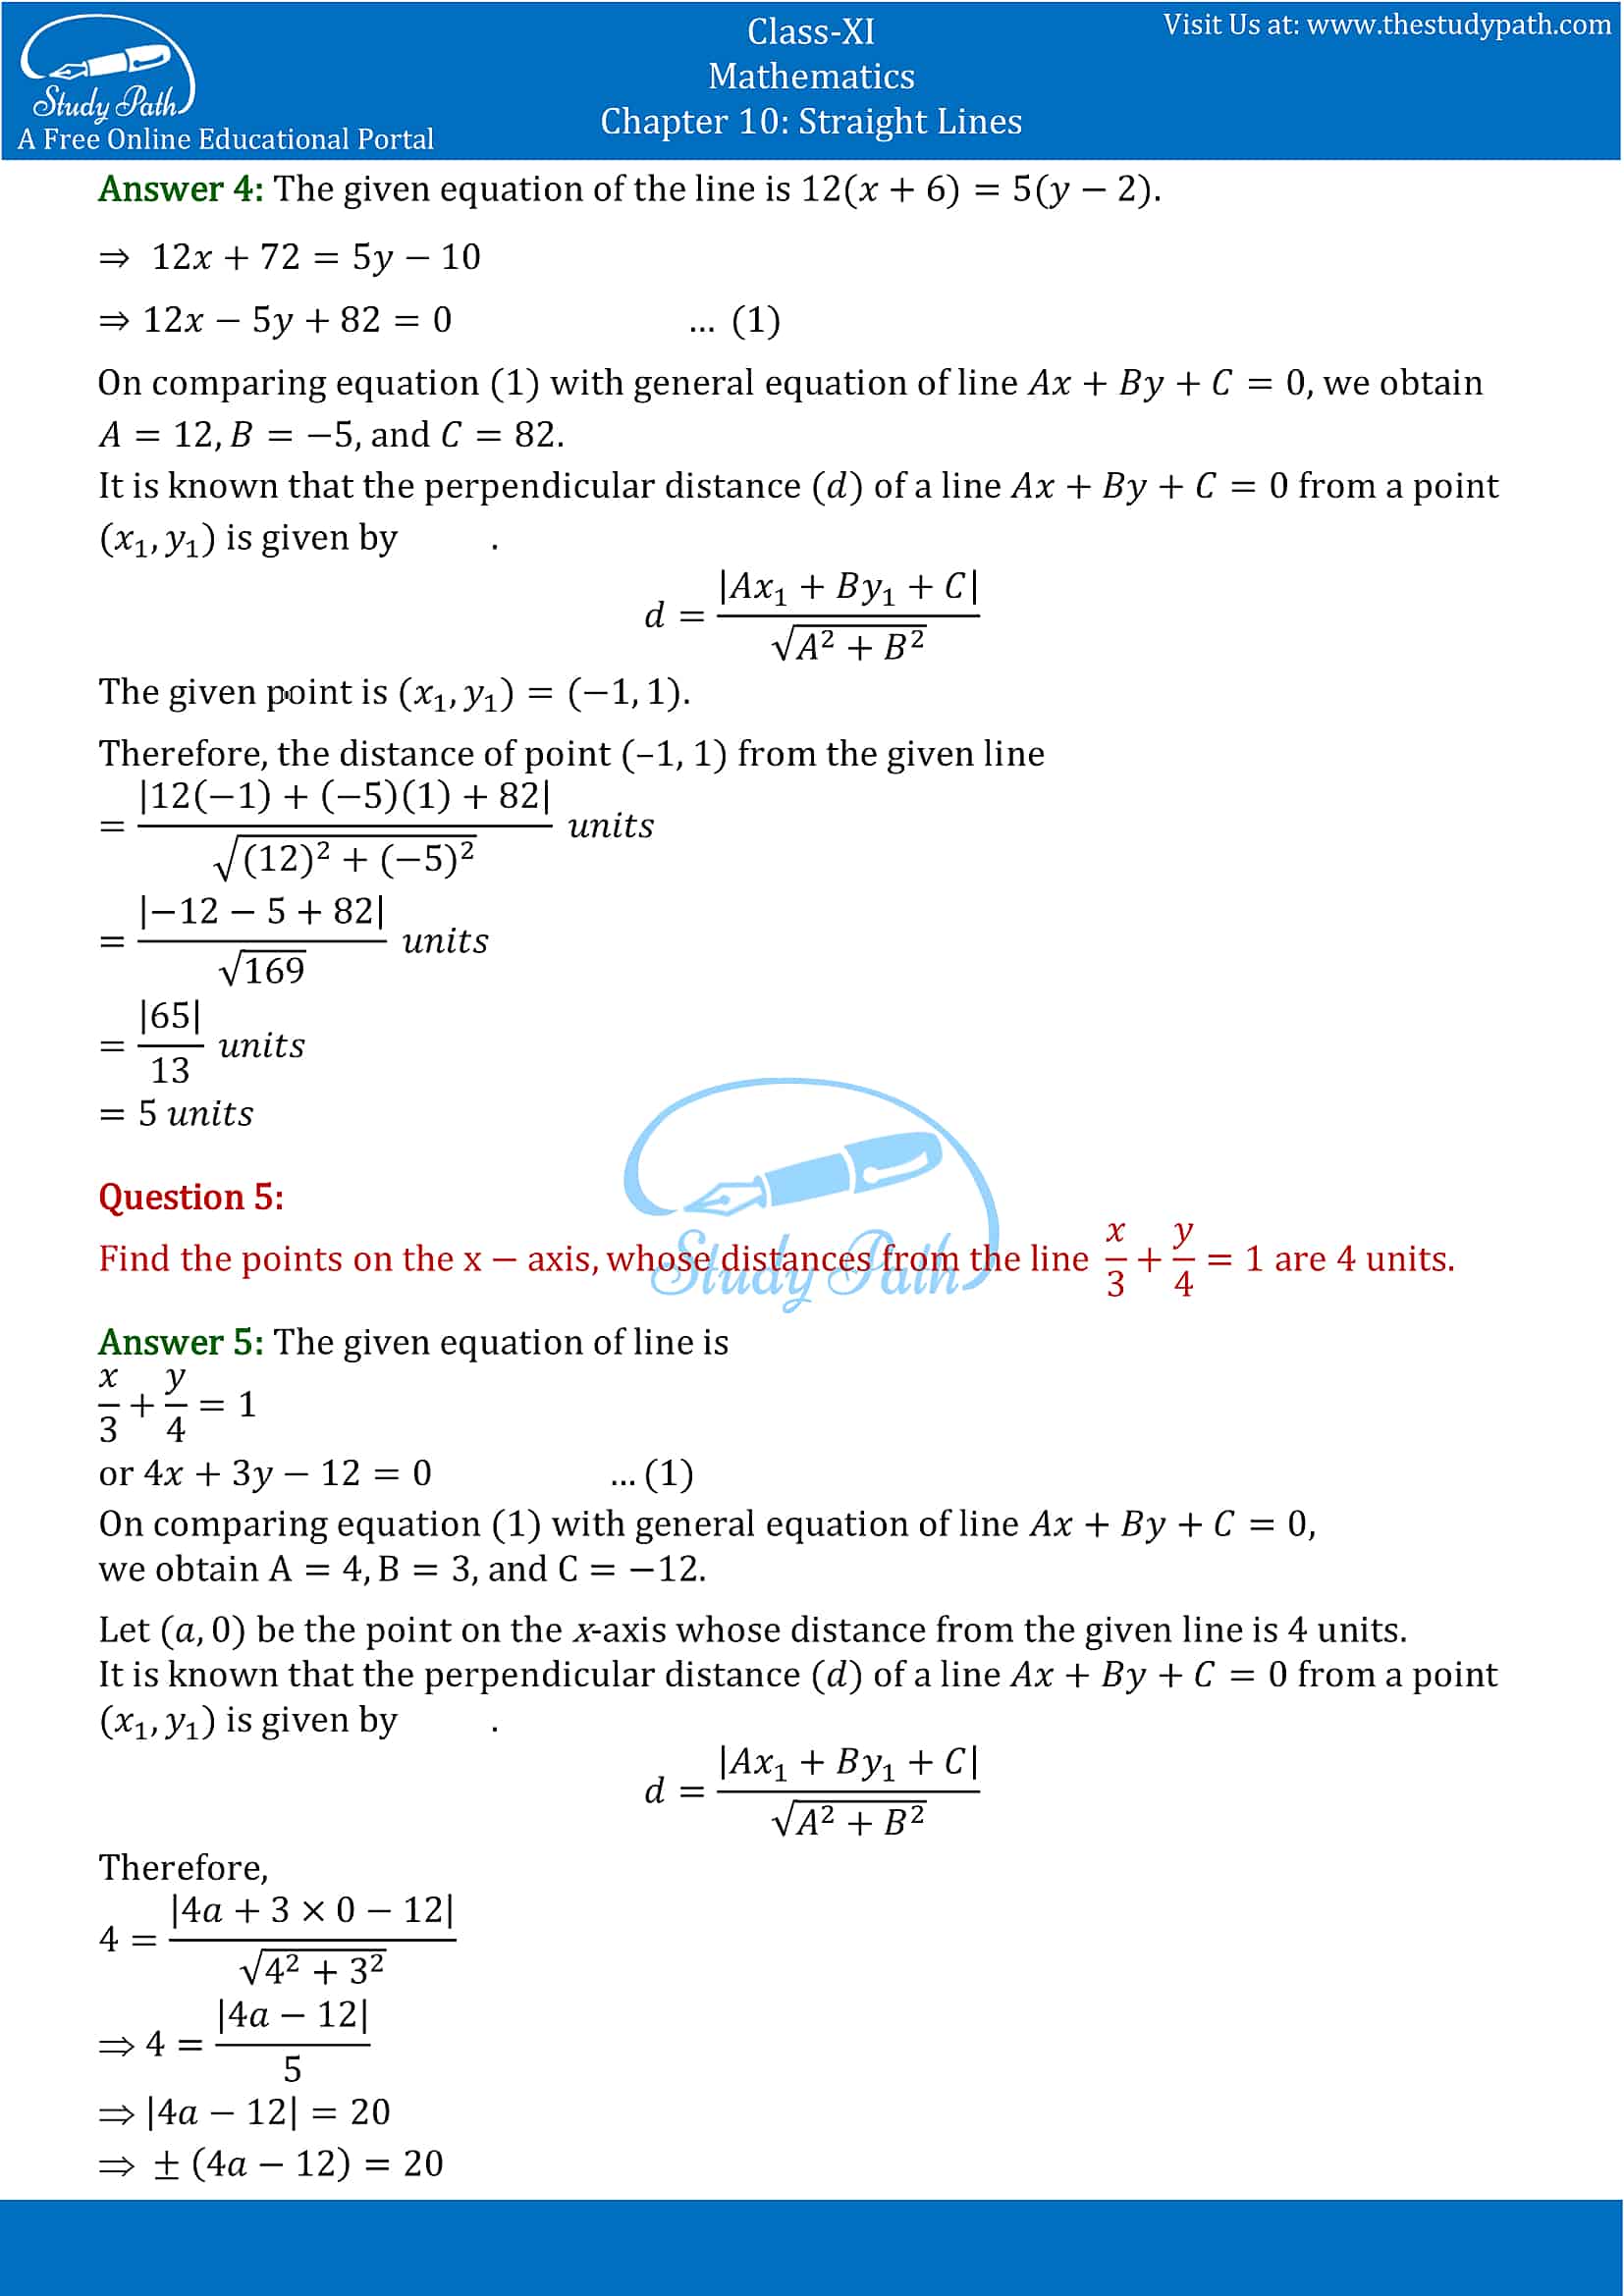 NCERT Solutions for Class 11 Maths chapter 10 Straight Lines Exercise 10.3 part-4